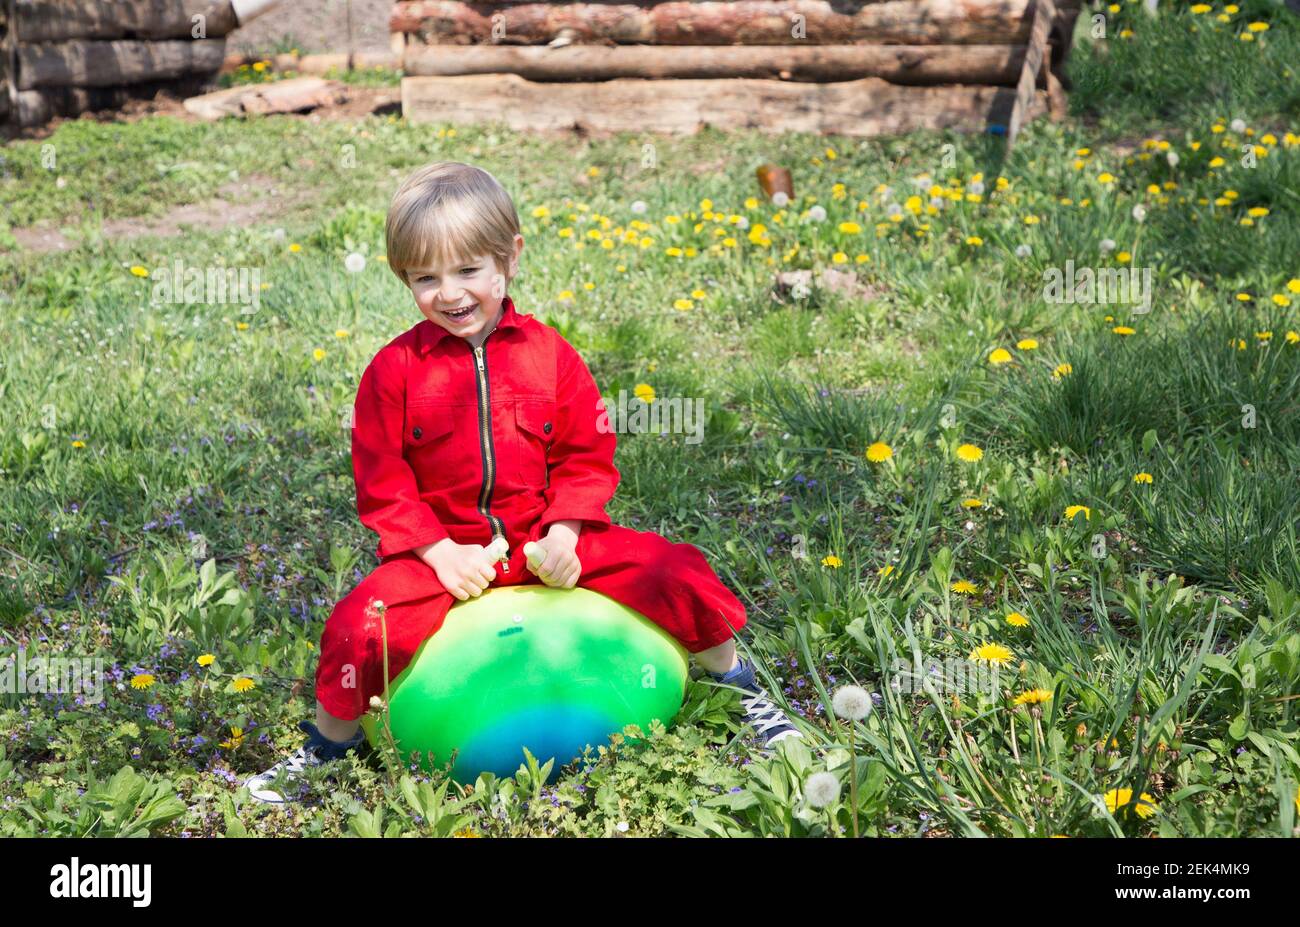 Toddler boy cheerfully jumps on an inflatable ball on green lawn in daytime. Happy childhood, joy of playing outdoors on a warm spring sunny day, free Stock Photo